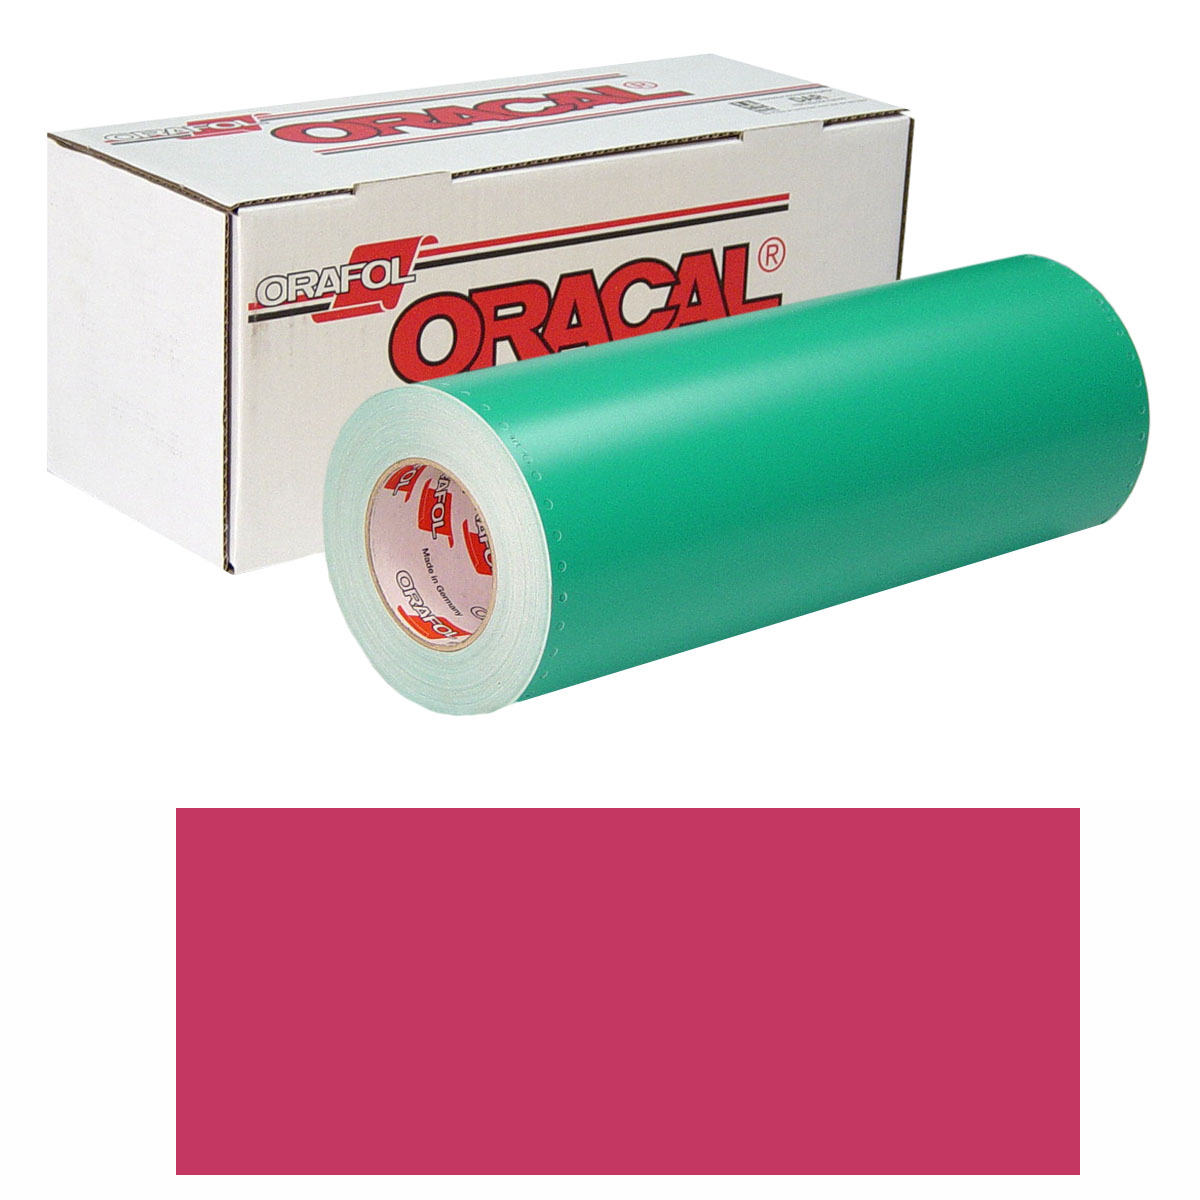 ORACAL 8500 15in X 10yd 031 Red